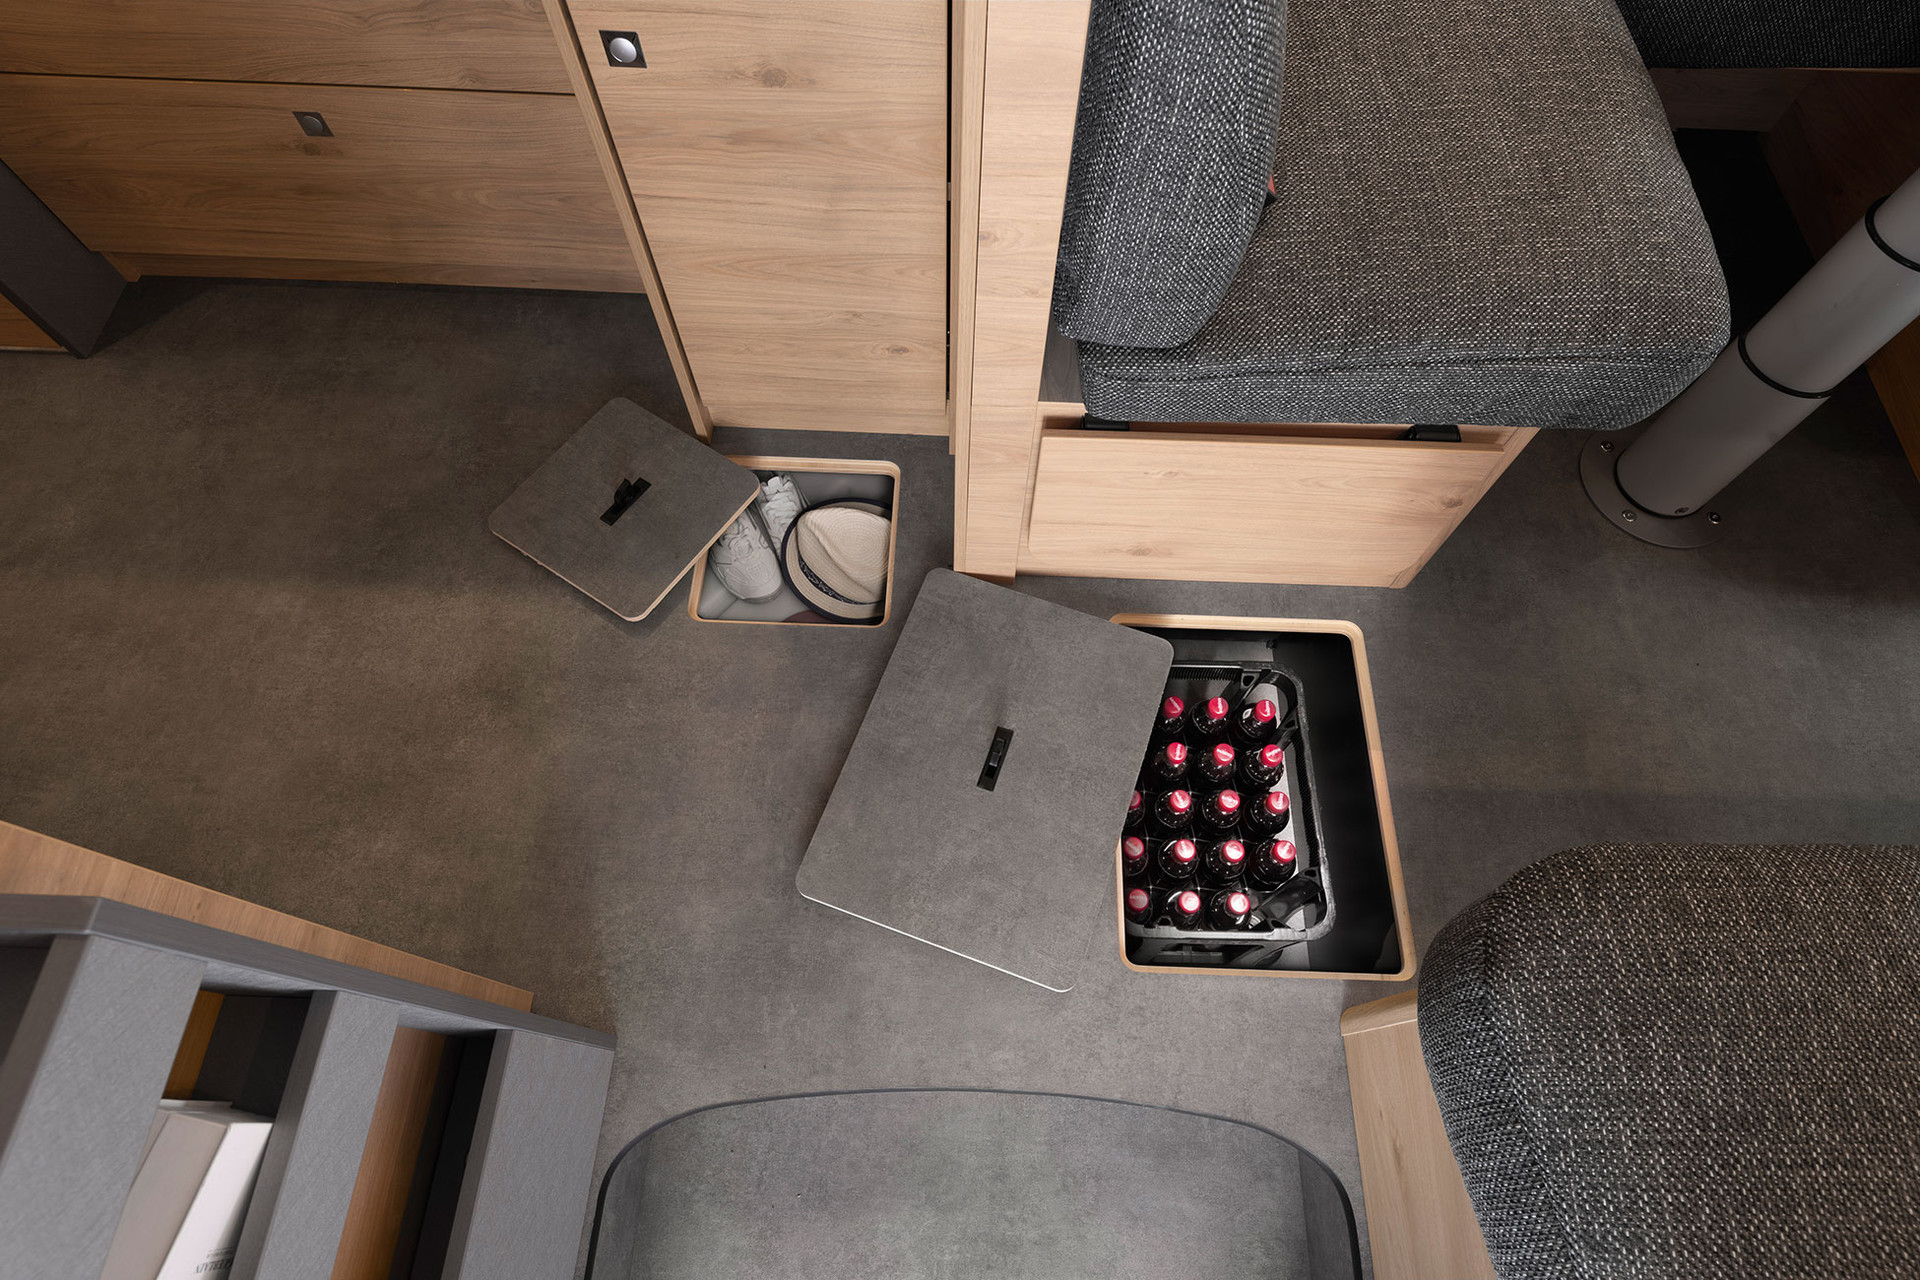 Several floor compartments provide direct access to the 40 cm-high double floor. They can be used either as storage space – even for an entire crate of beverages – or as service compartments providing access to the technology built into the double floor.